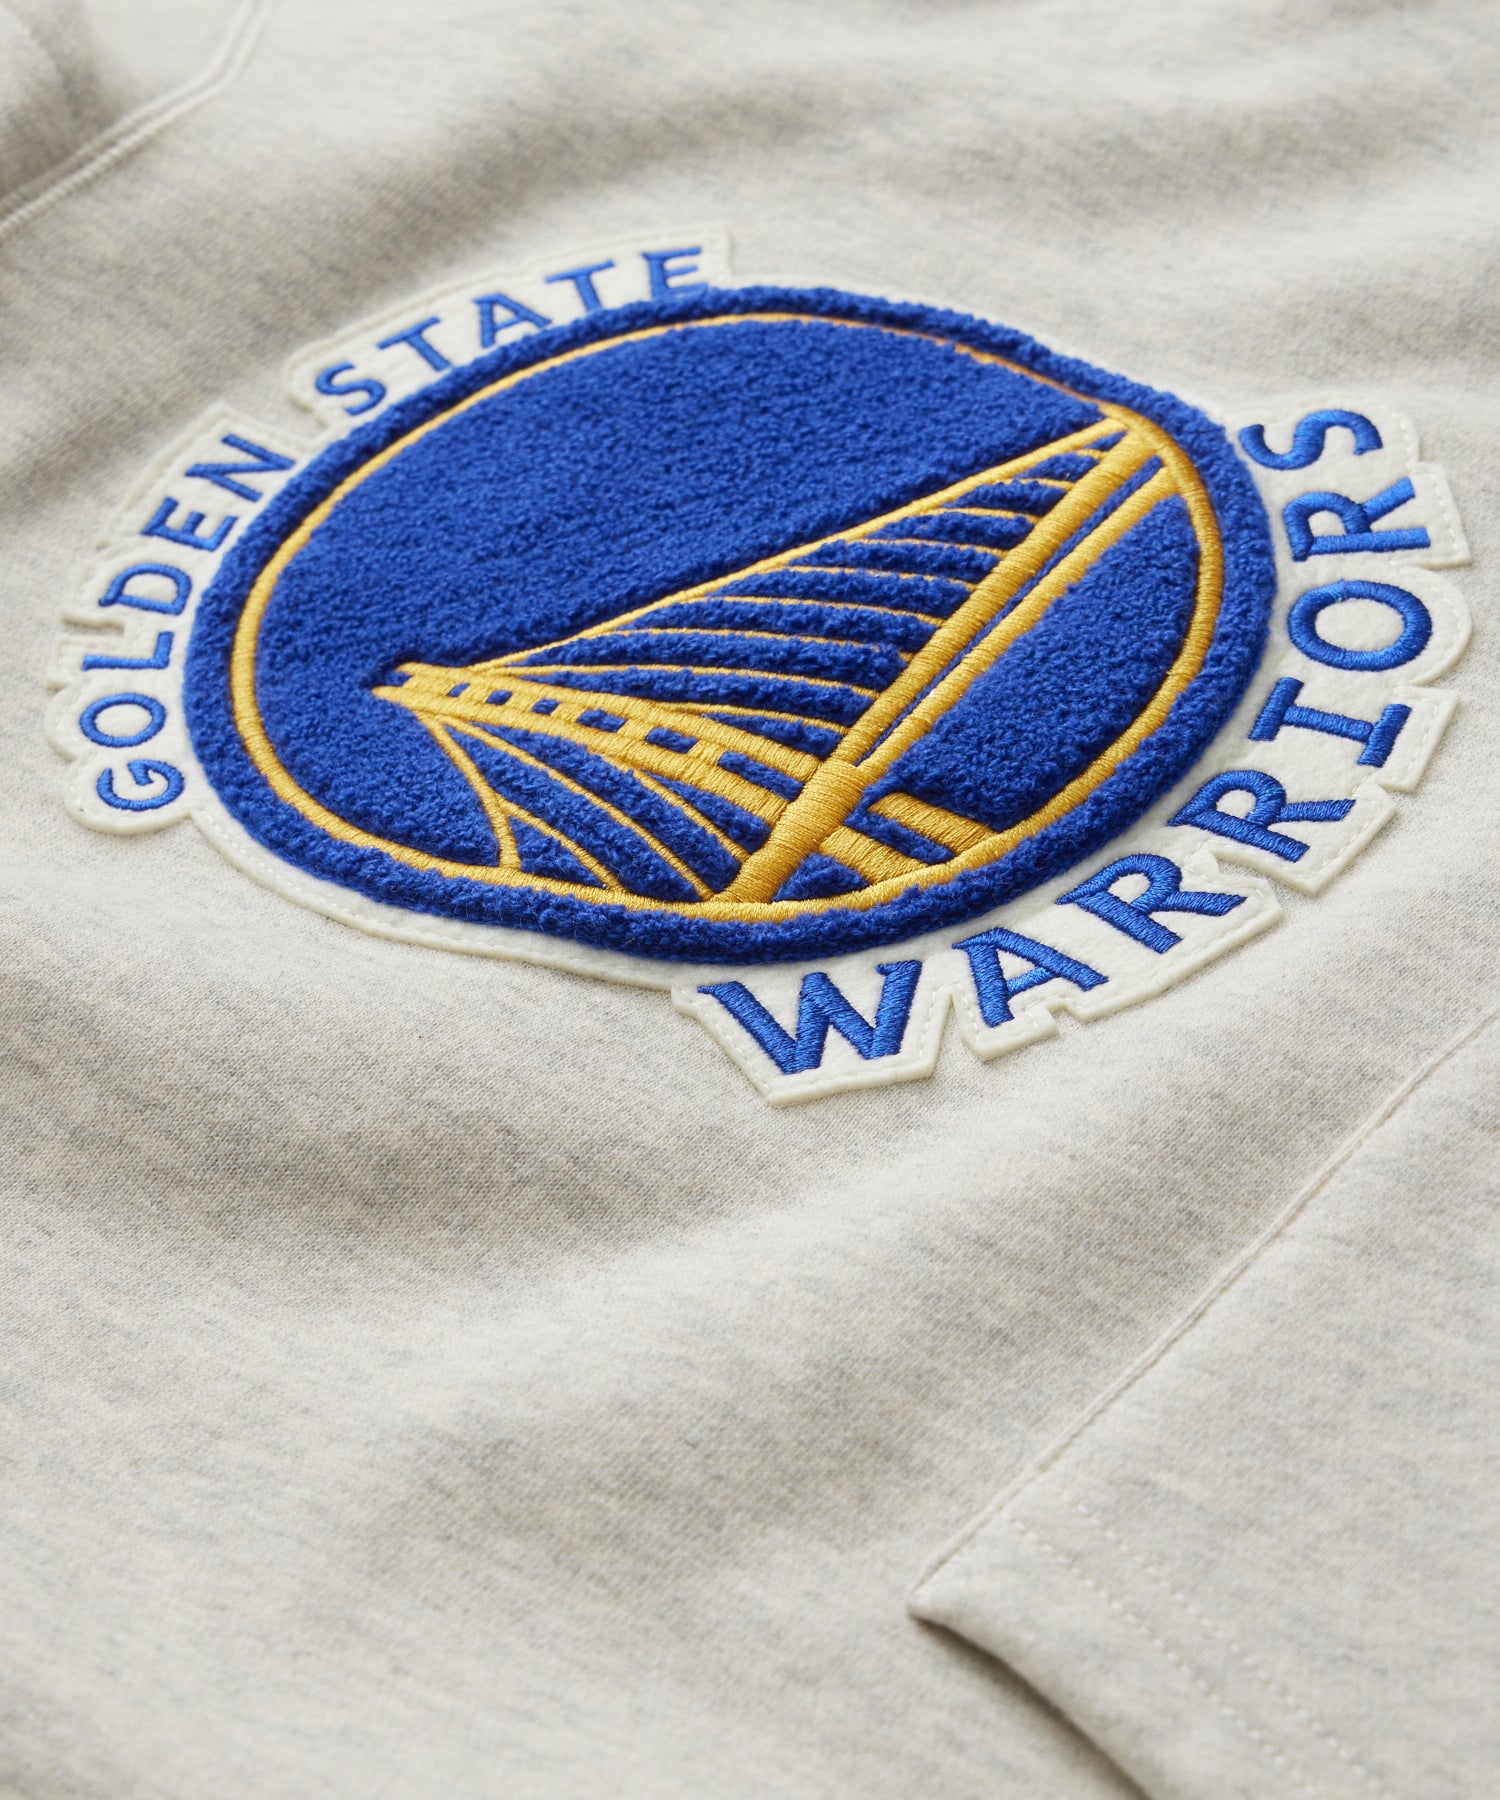 NBA GOLDEN STATE WARRIORS EMBROIDERED HOODIE